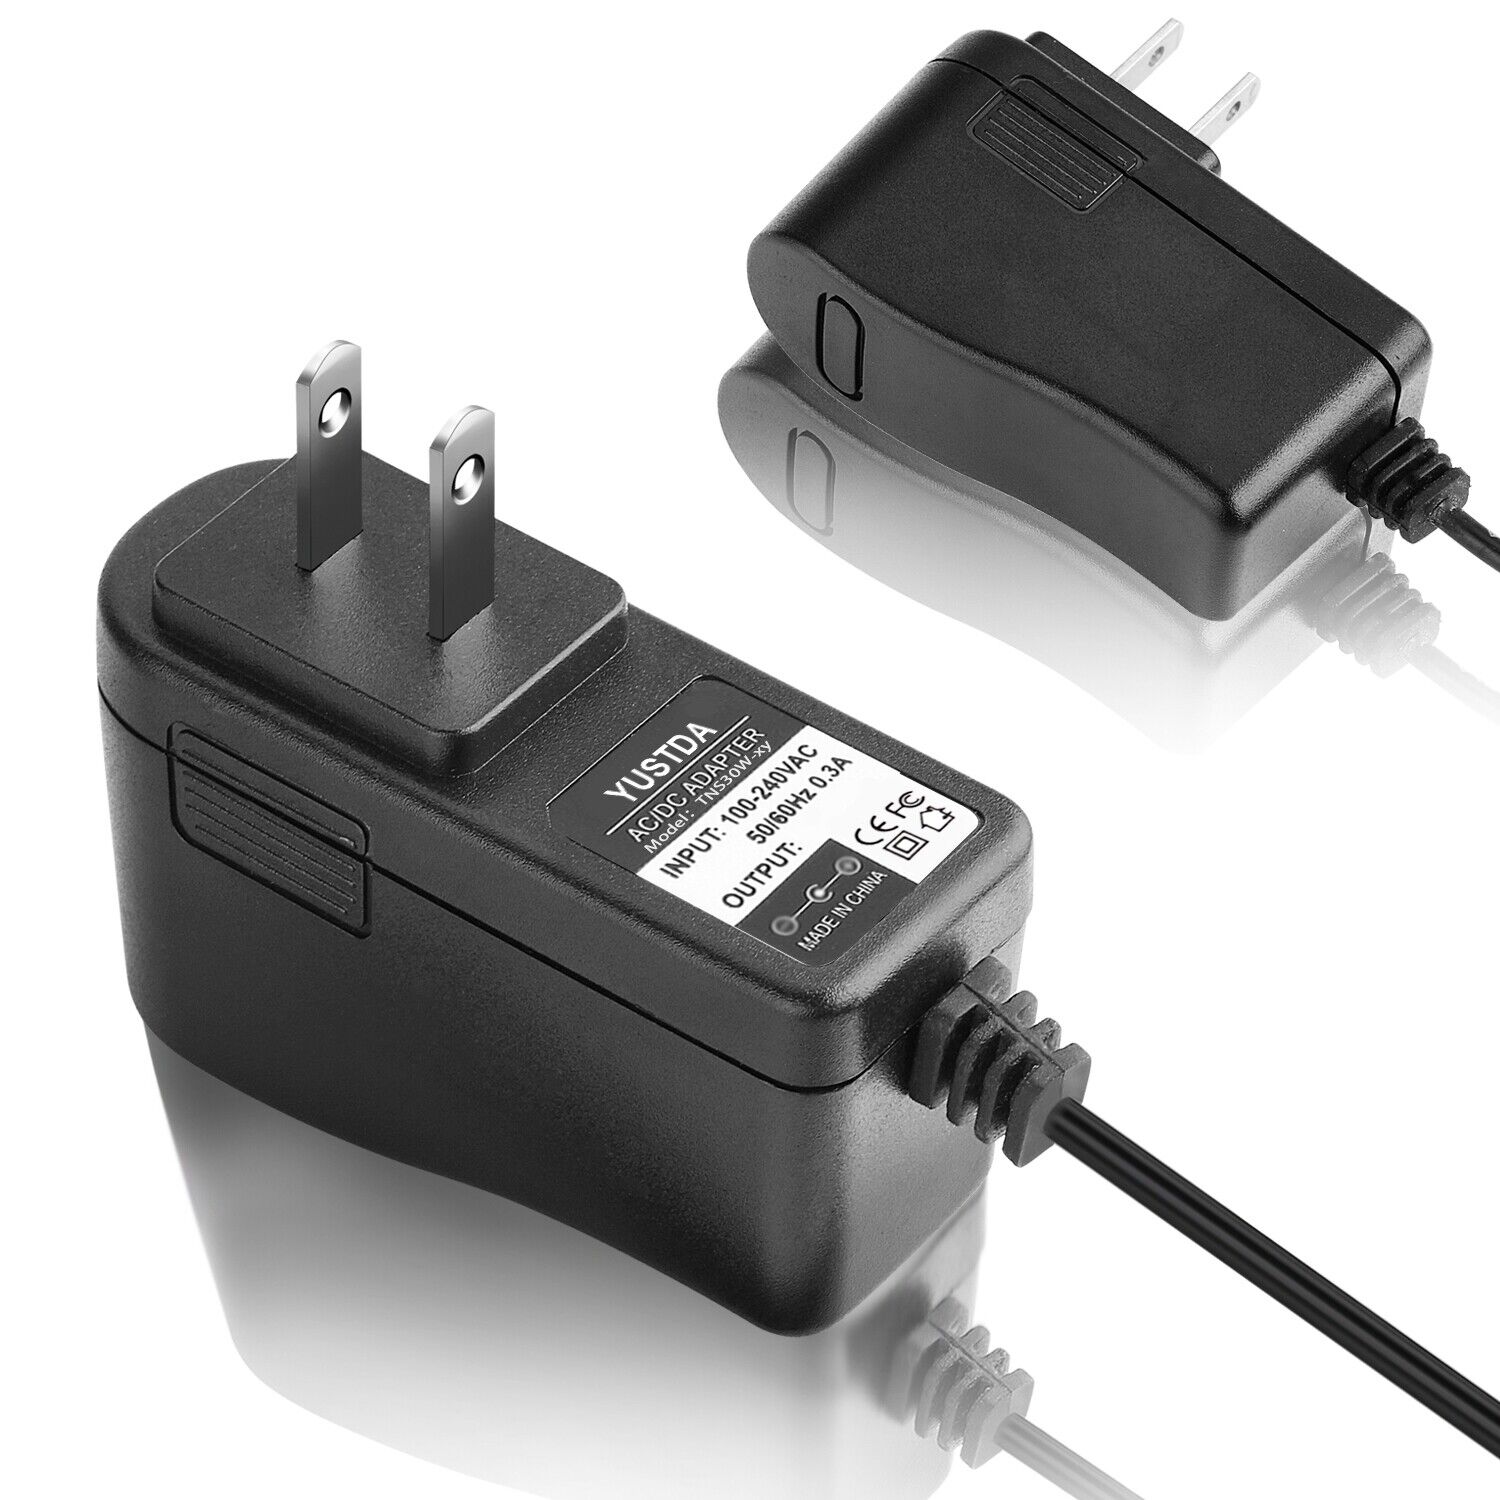 Charger AC Adapter for ROLLPLAY Volkswagen Translated W486TG- Spring new work Beetle W486TG